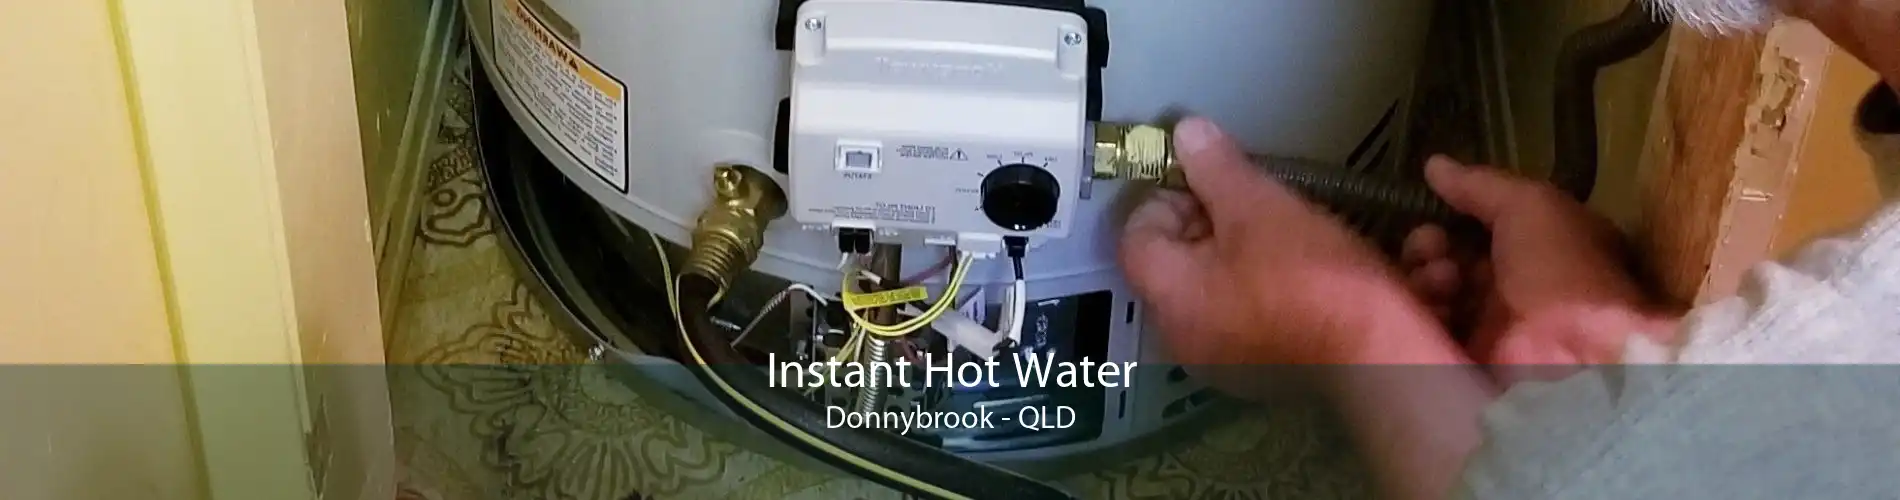 Instant Hot Water Donnybrook - QLD